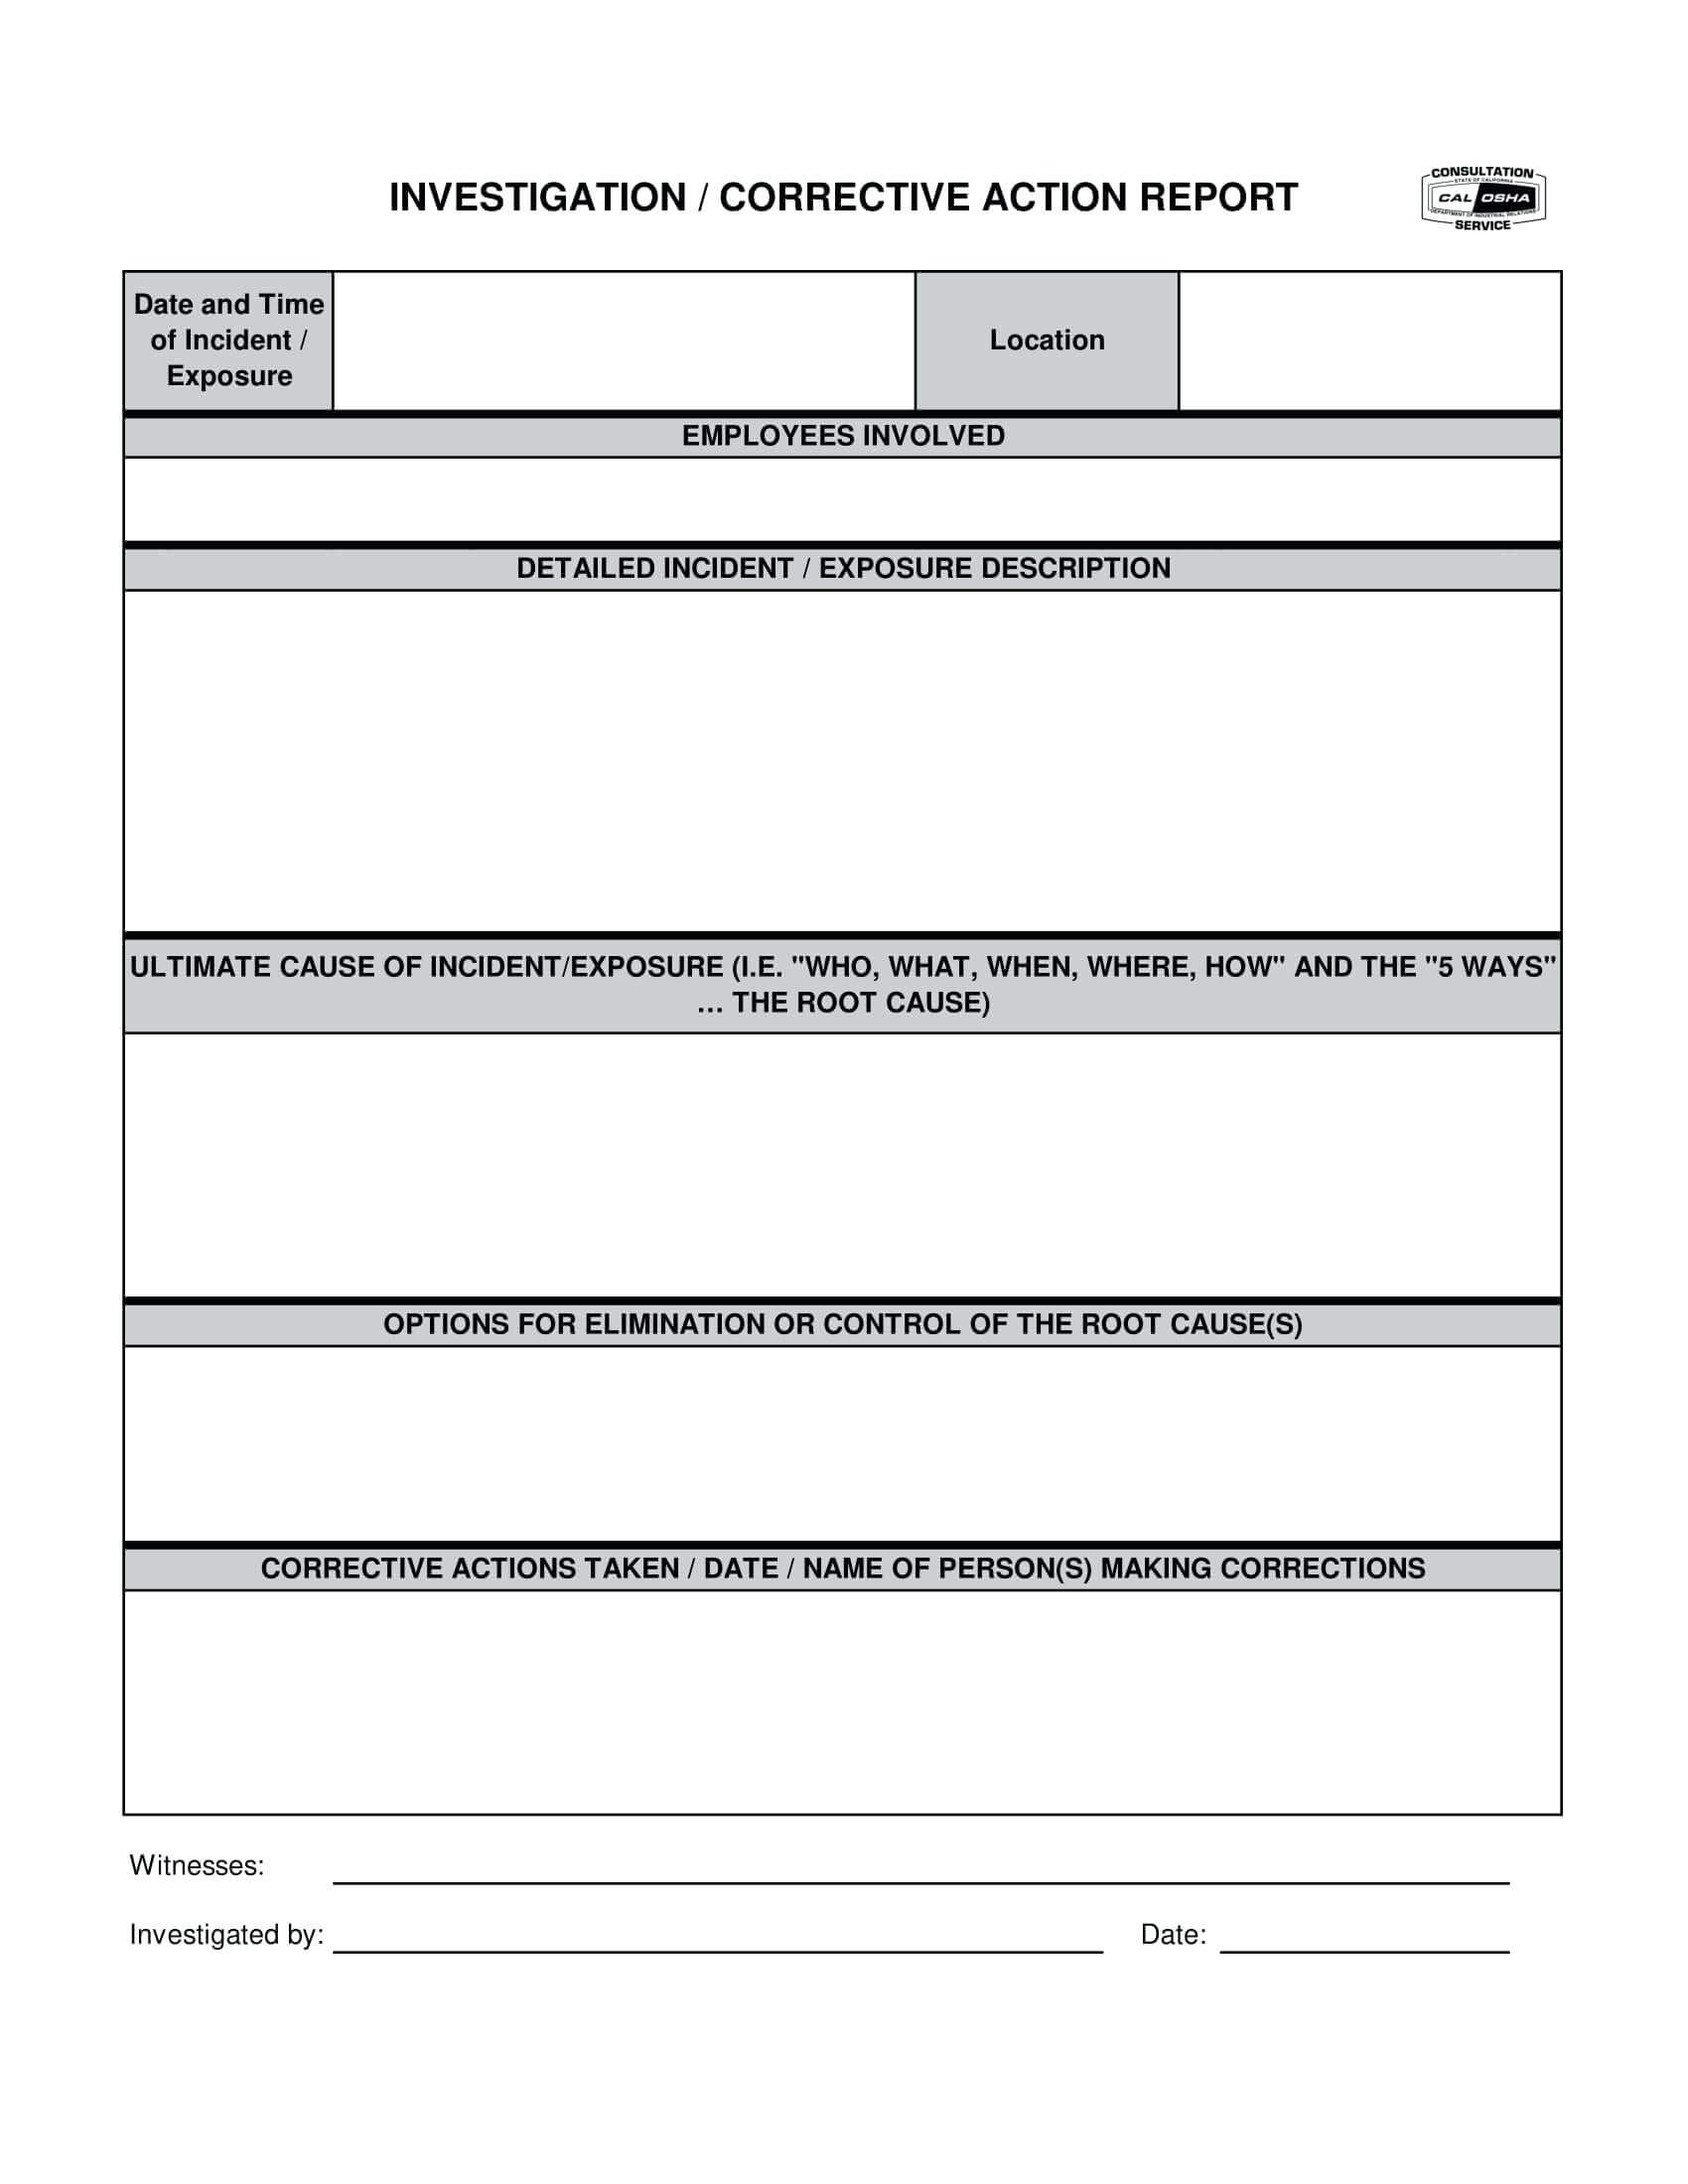 After Action Report Template – Wovensheet.co Regarding Corrective Action Report Template